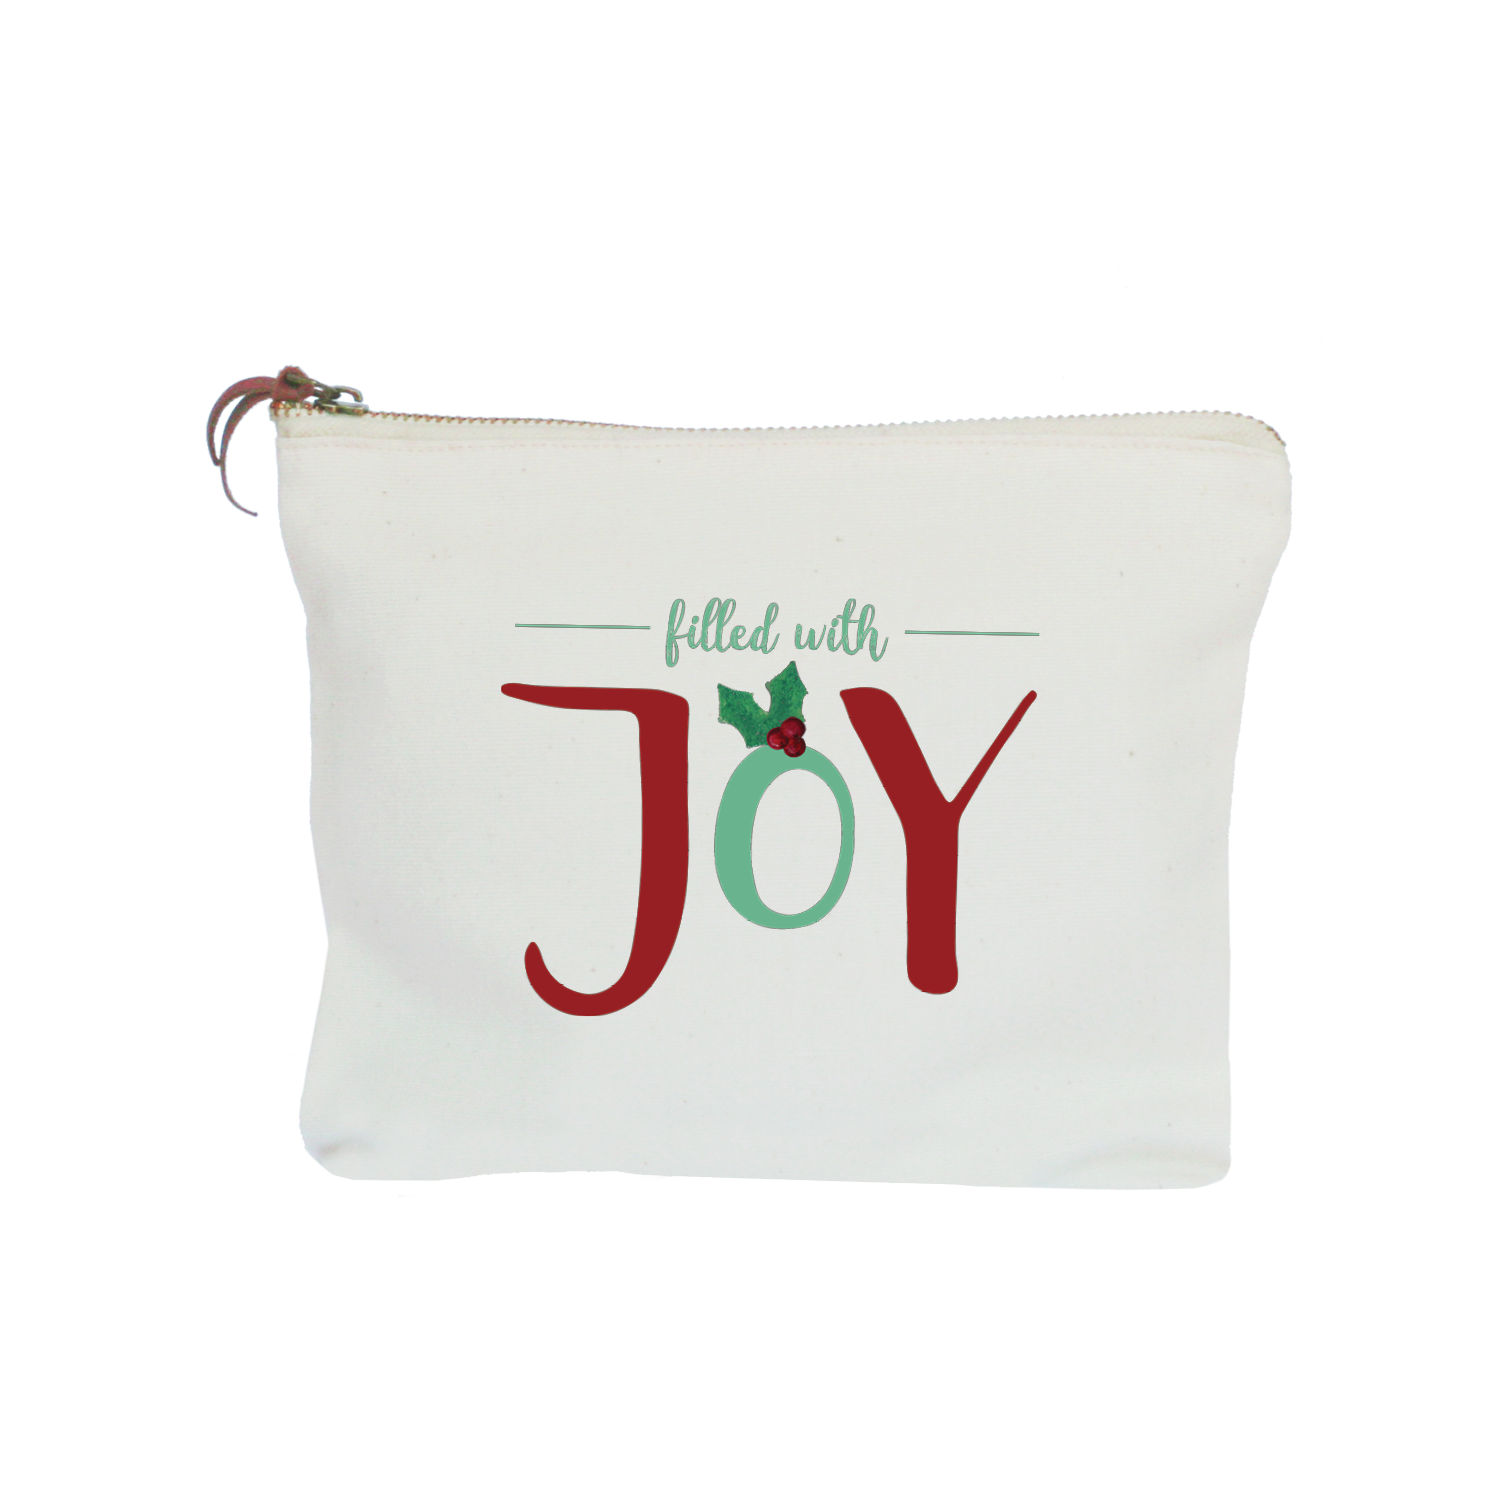 filled with joy zipper pouch